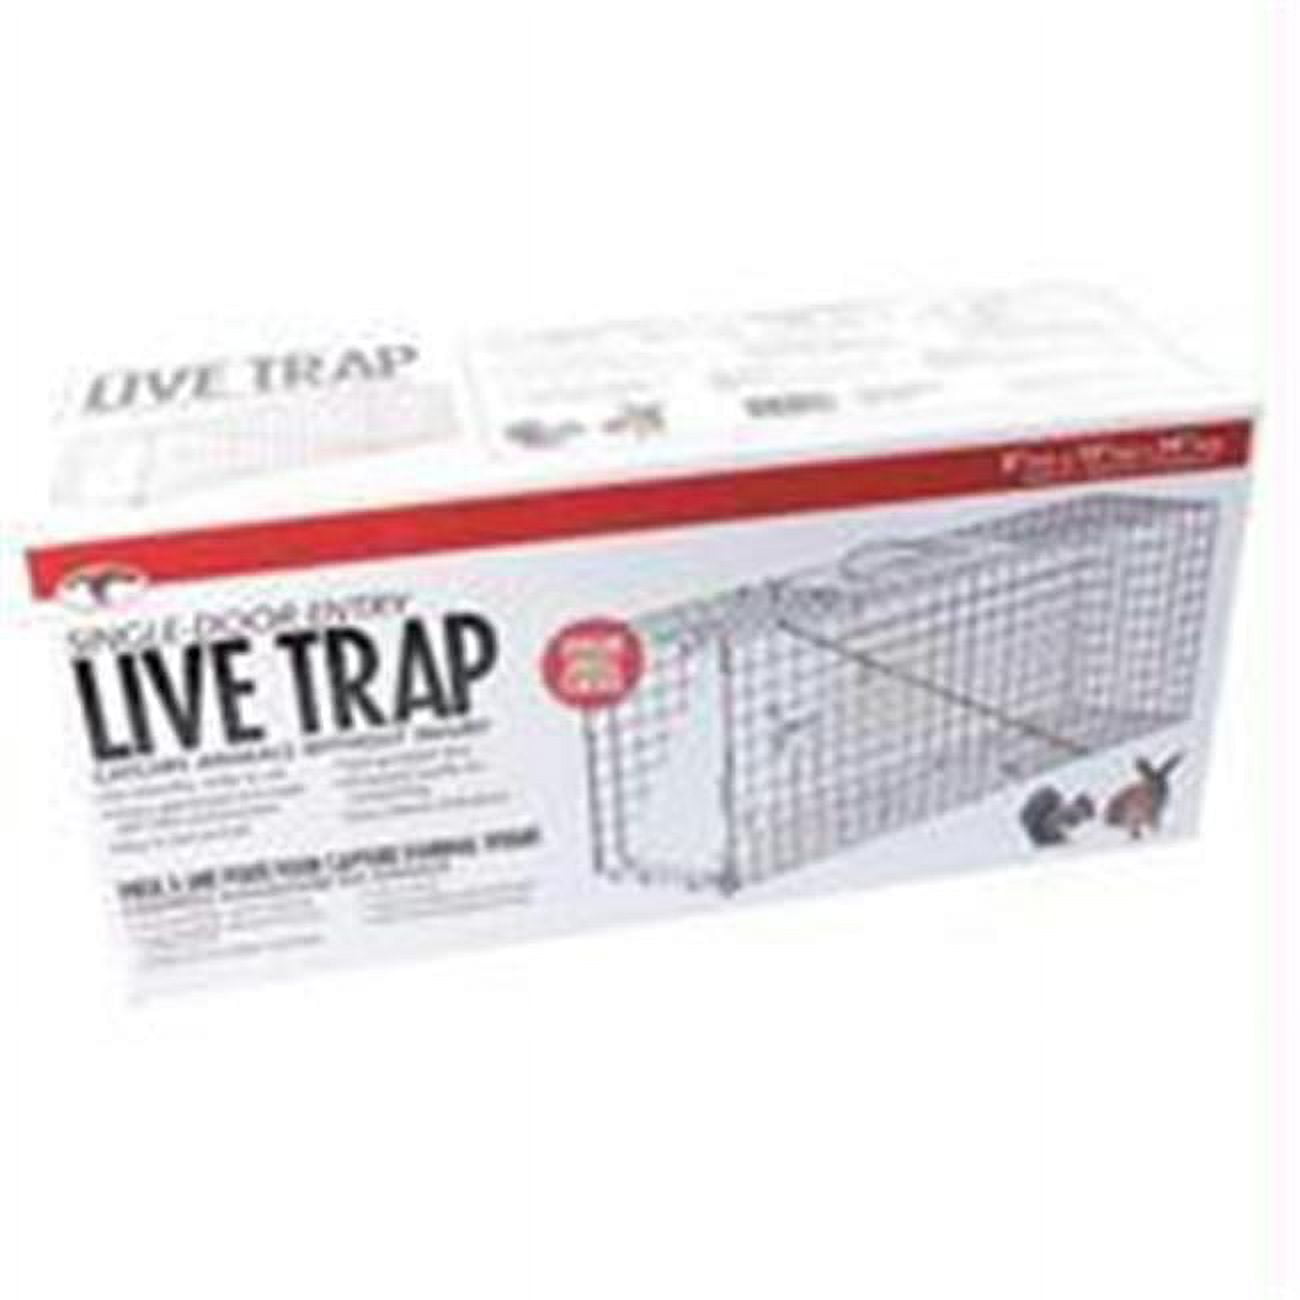 Little Giant® Single Door Live Animal Trap Small